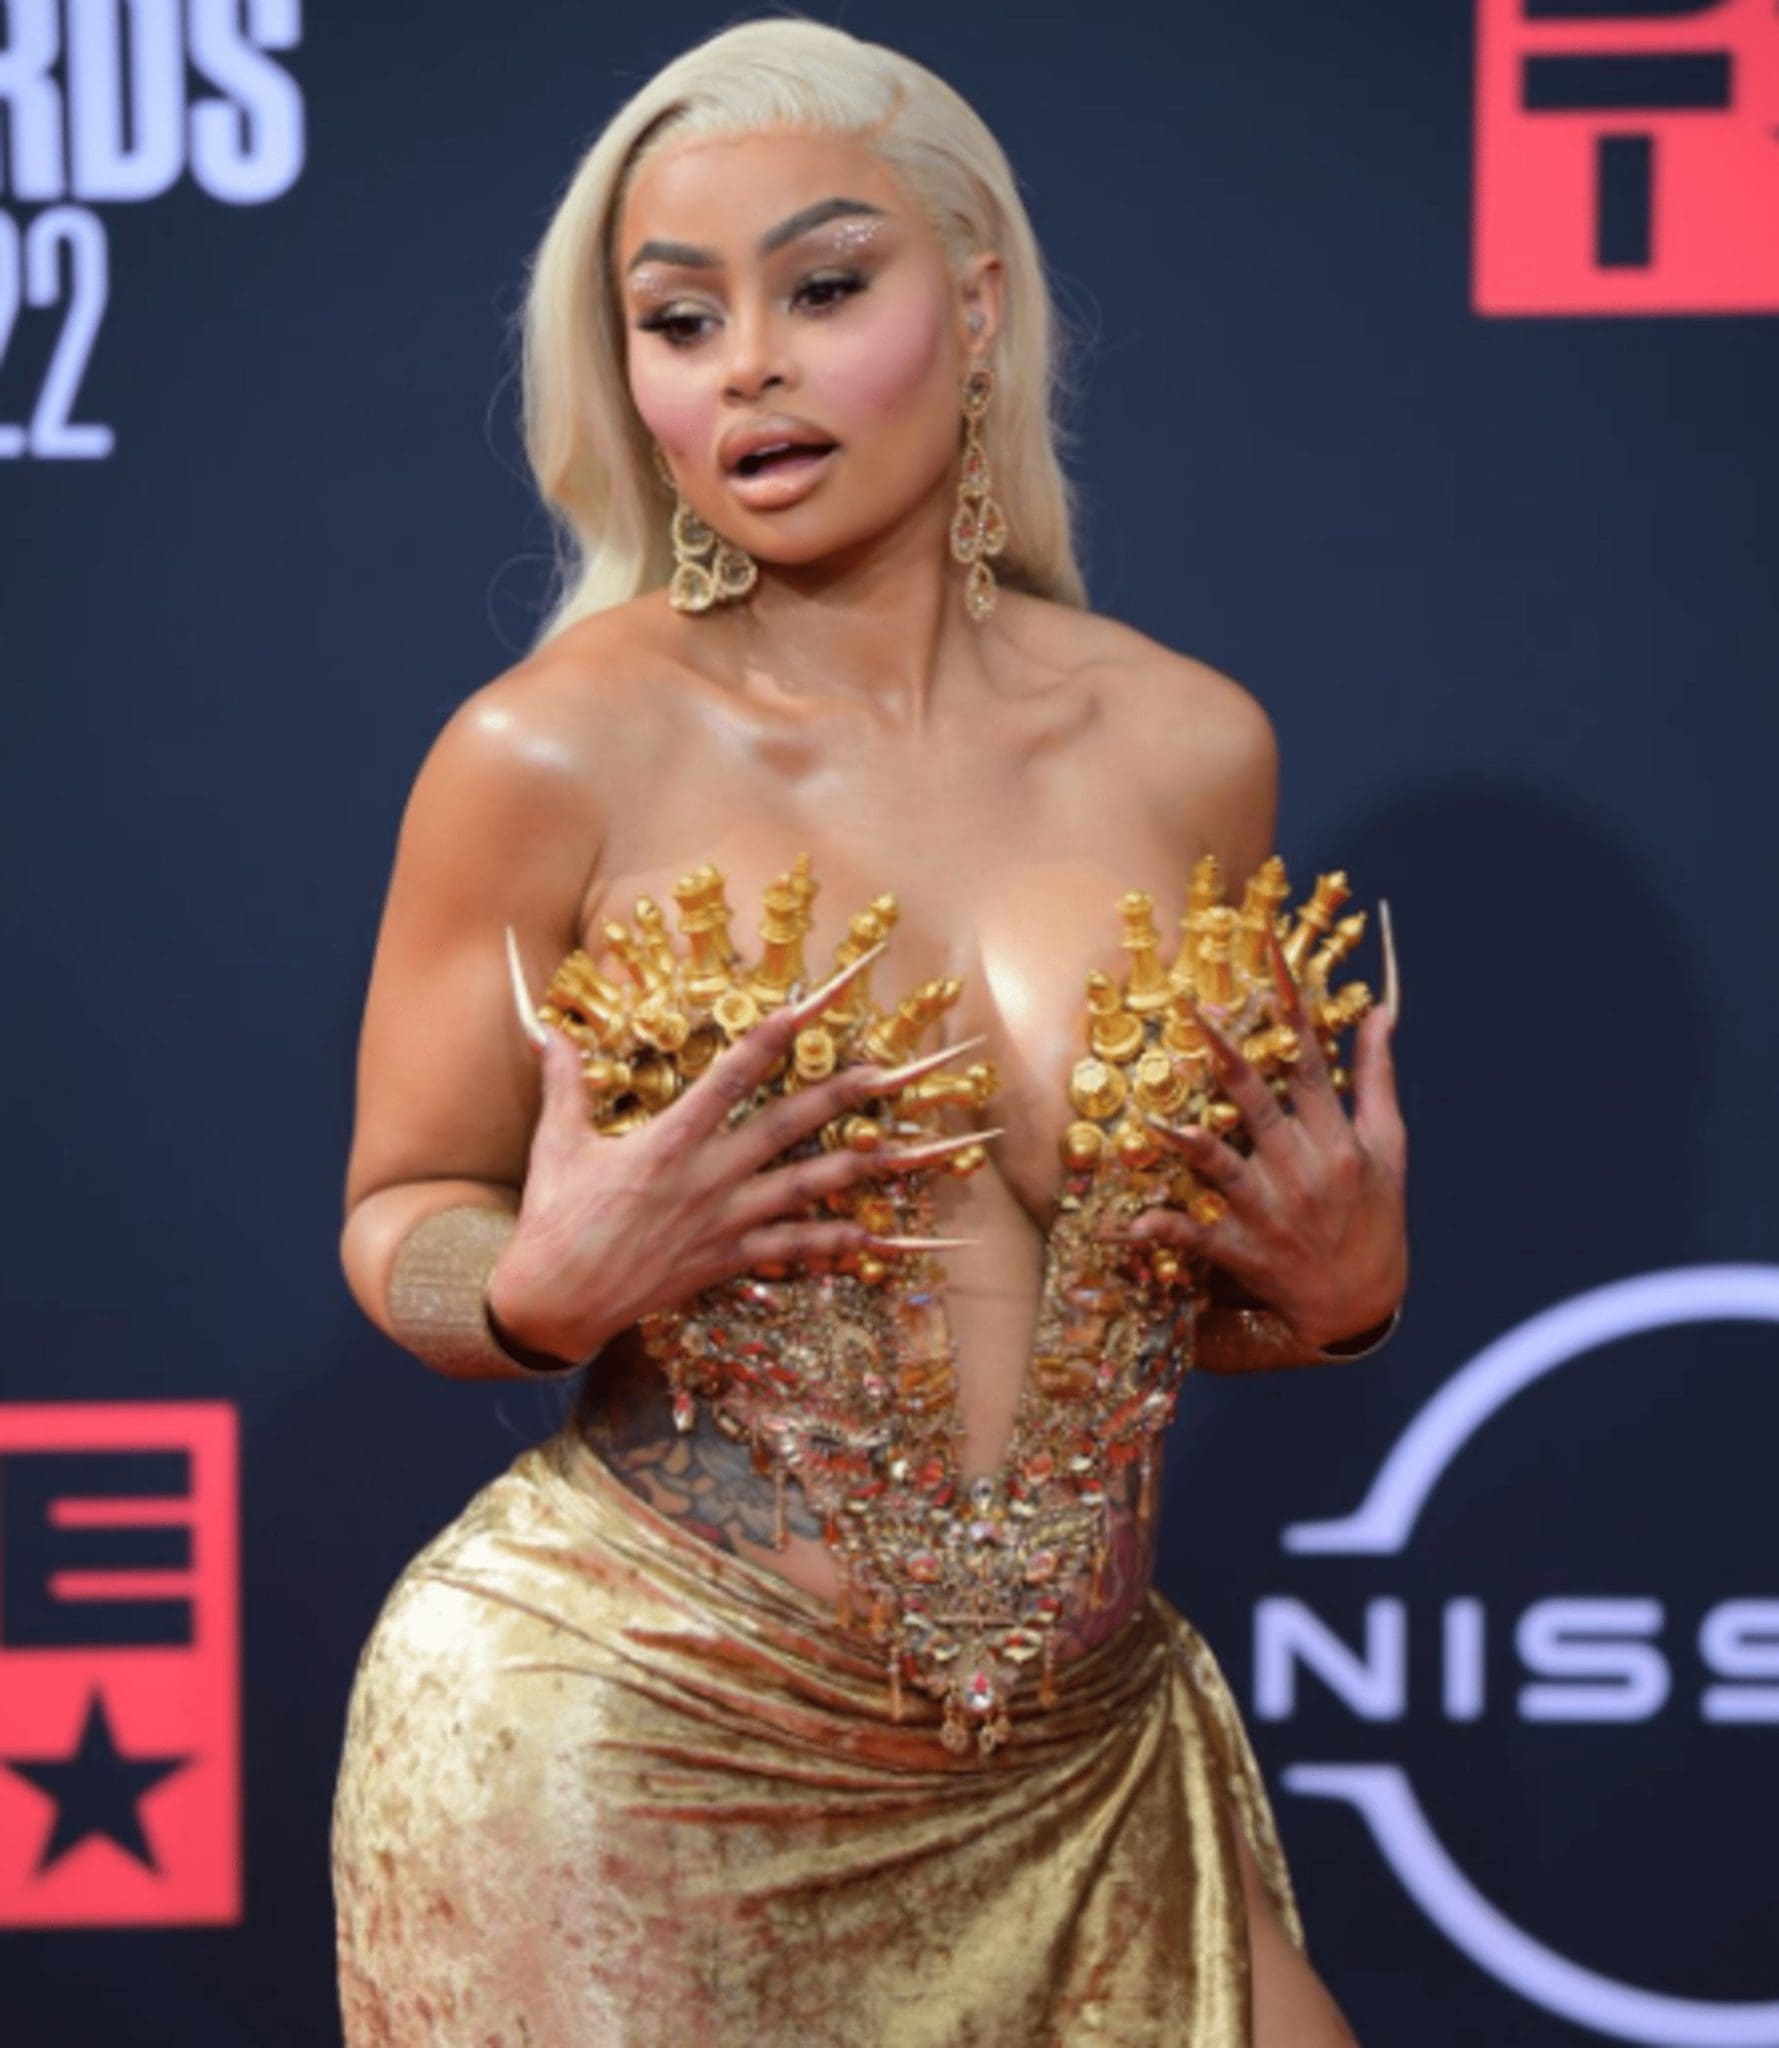 In A Seductive Video, Blac Chyna Flaunted Her Incredible Figure